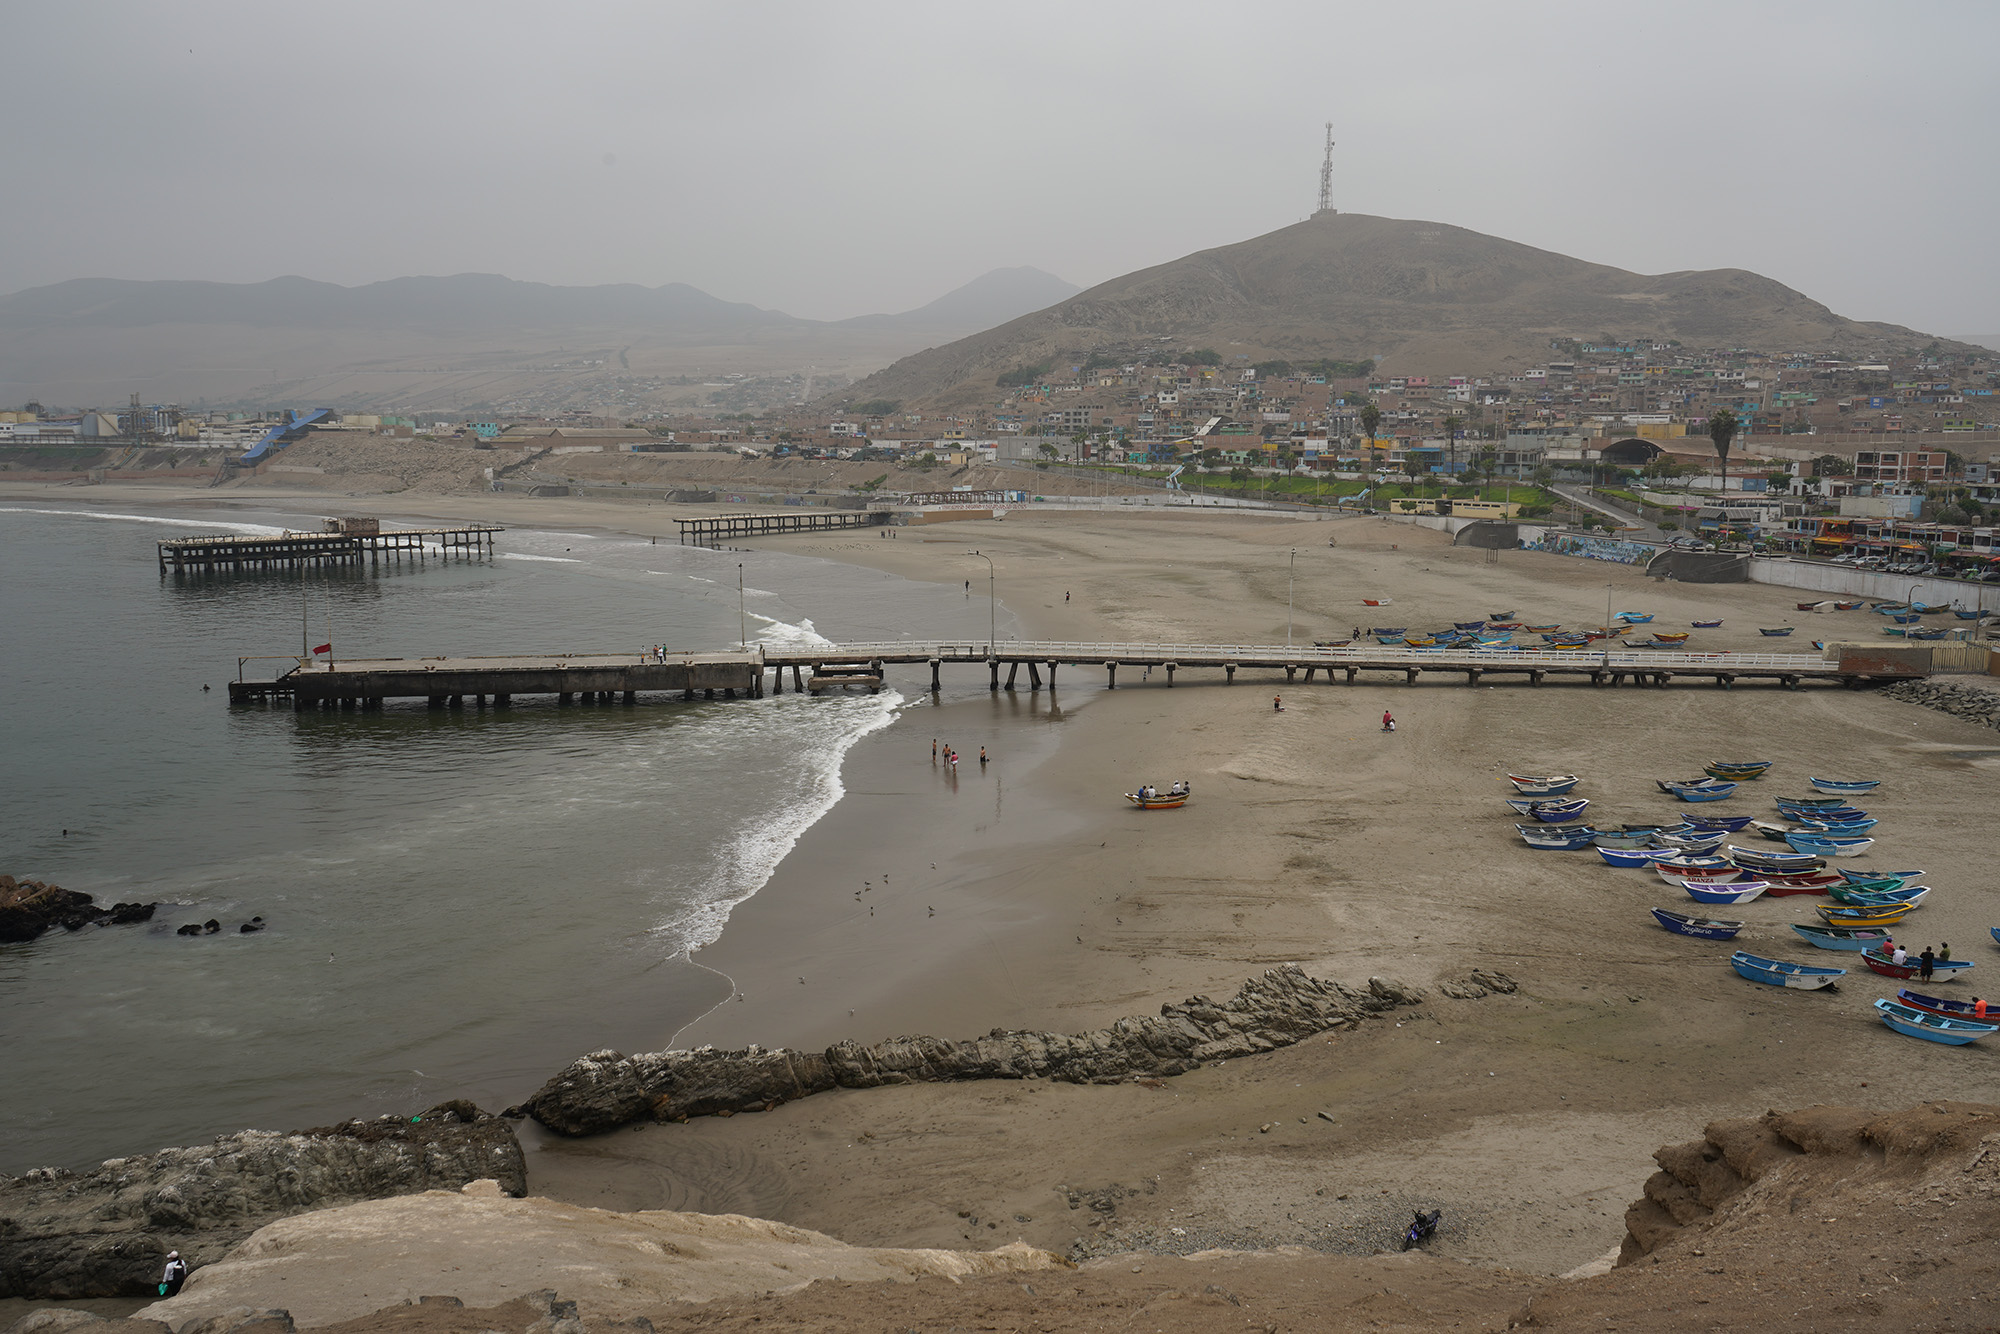 <p>Promoted by the Peruvian government, the port of Chancay aims to become a hub for trade between Asia and South America (Image: Leslie Moreno Custodio)</p>